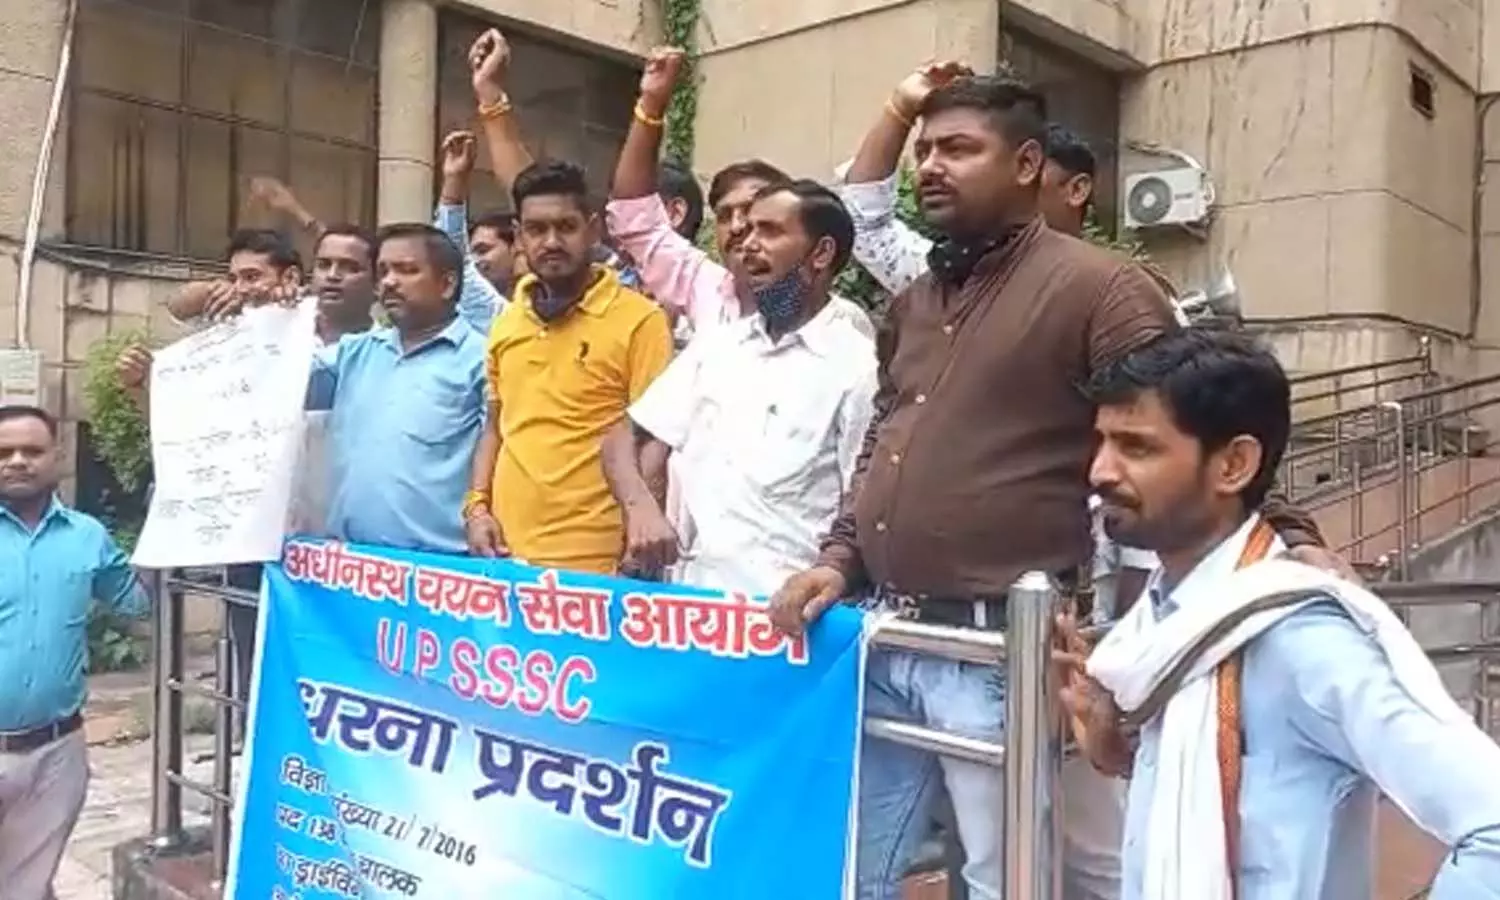 Government makes false promise to provide jobs, candidates protest in pickup building